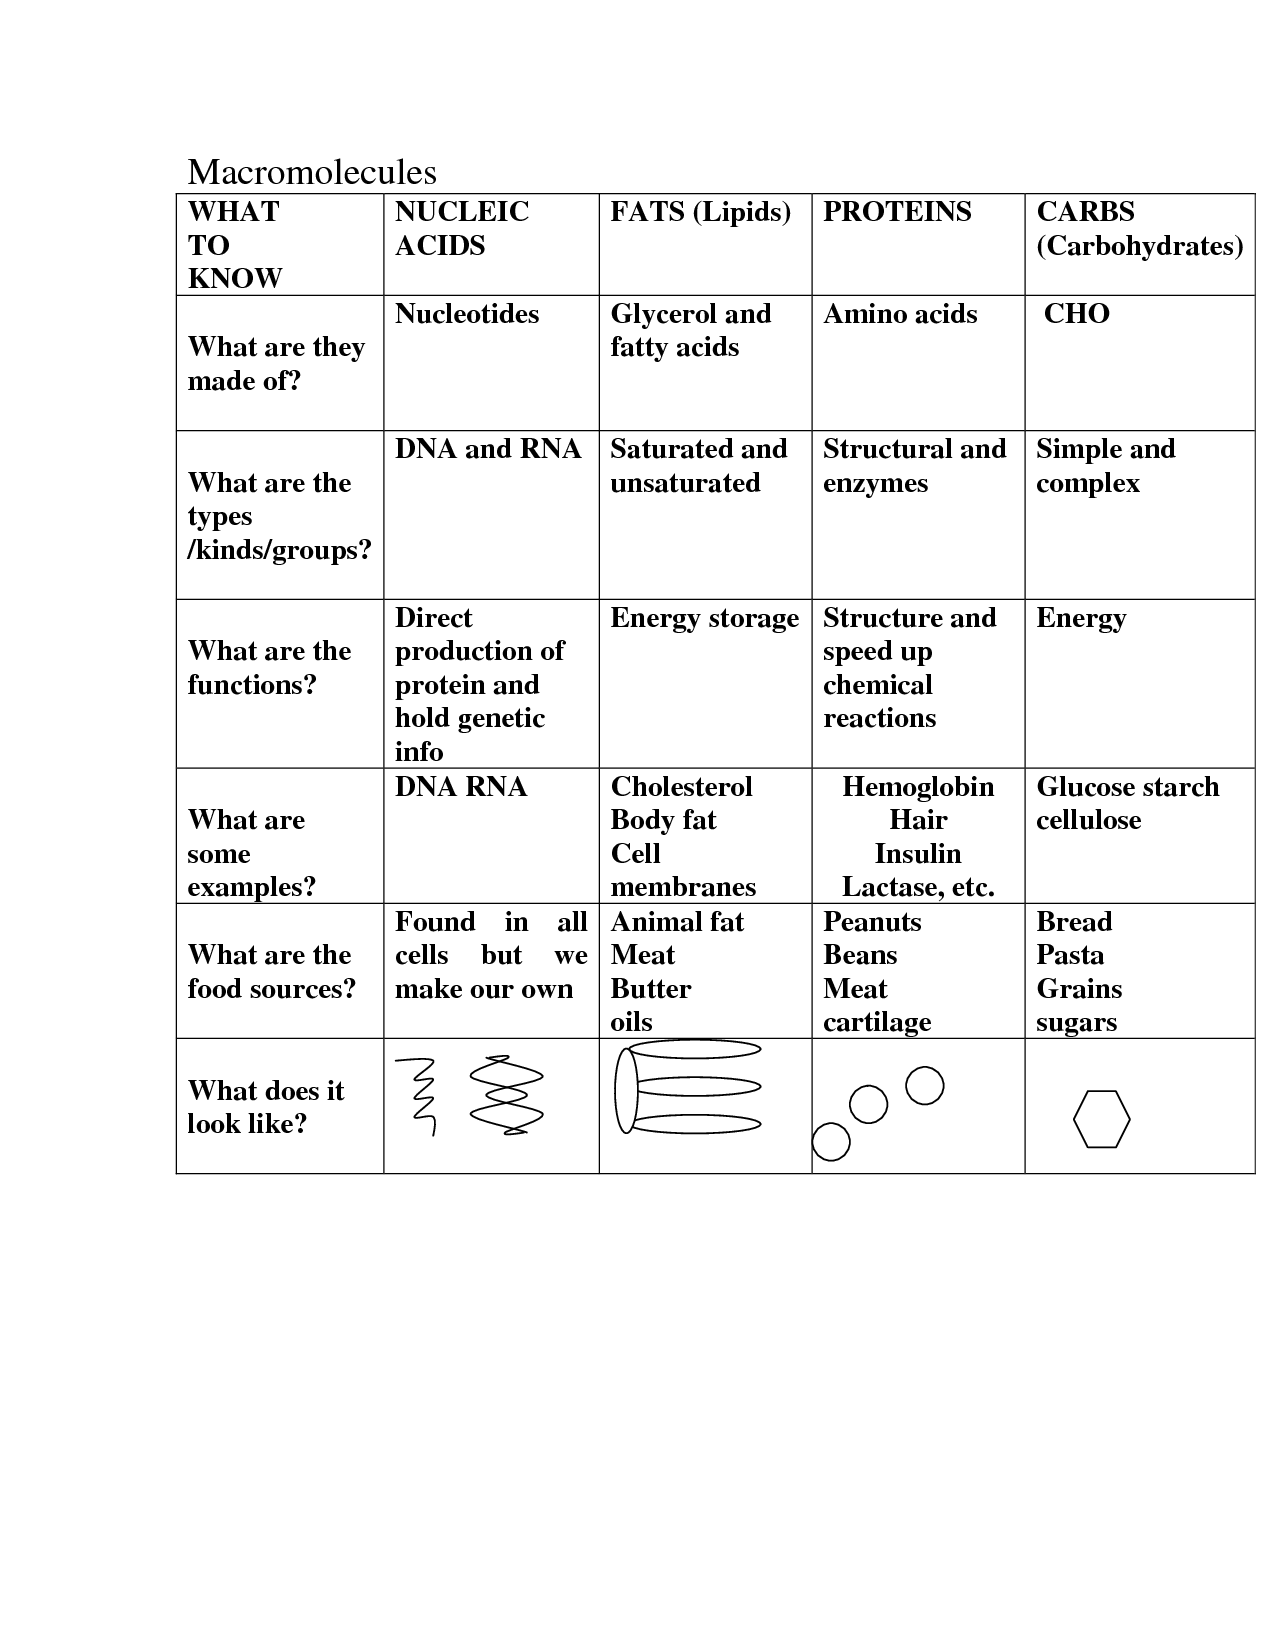 9 Best Images of Carbohydrates Fats And Proteins Worksheet